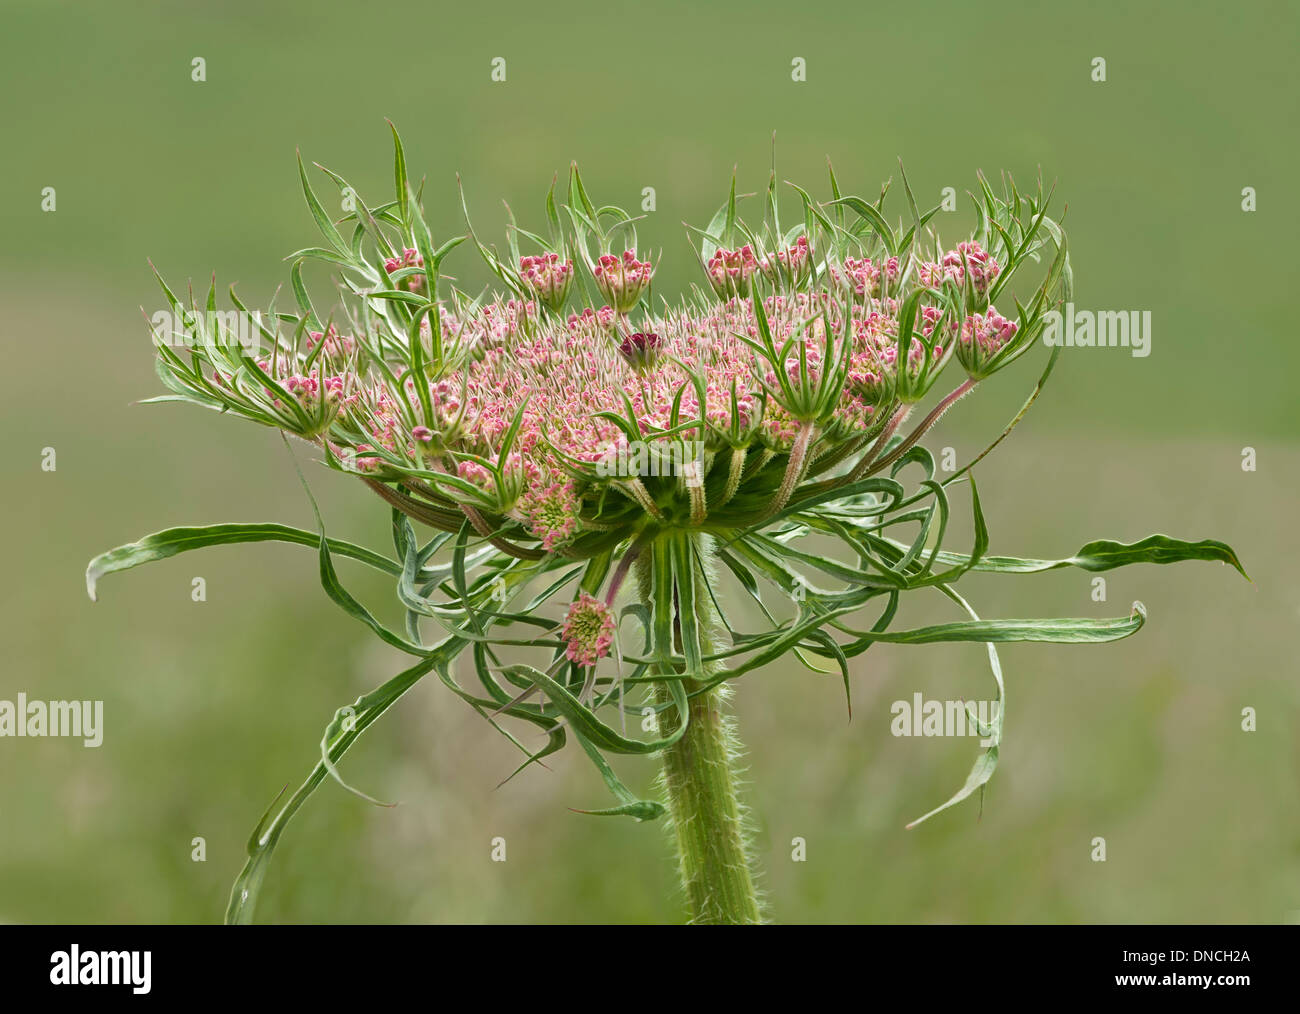 Flower umbel of Wild Carot (daucus carota) with a black contrasting flower in the centre Stock Photo